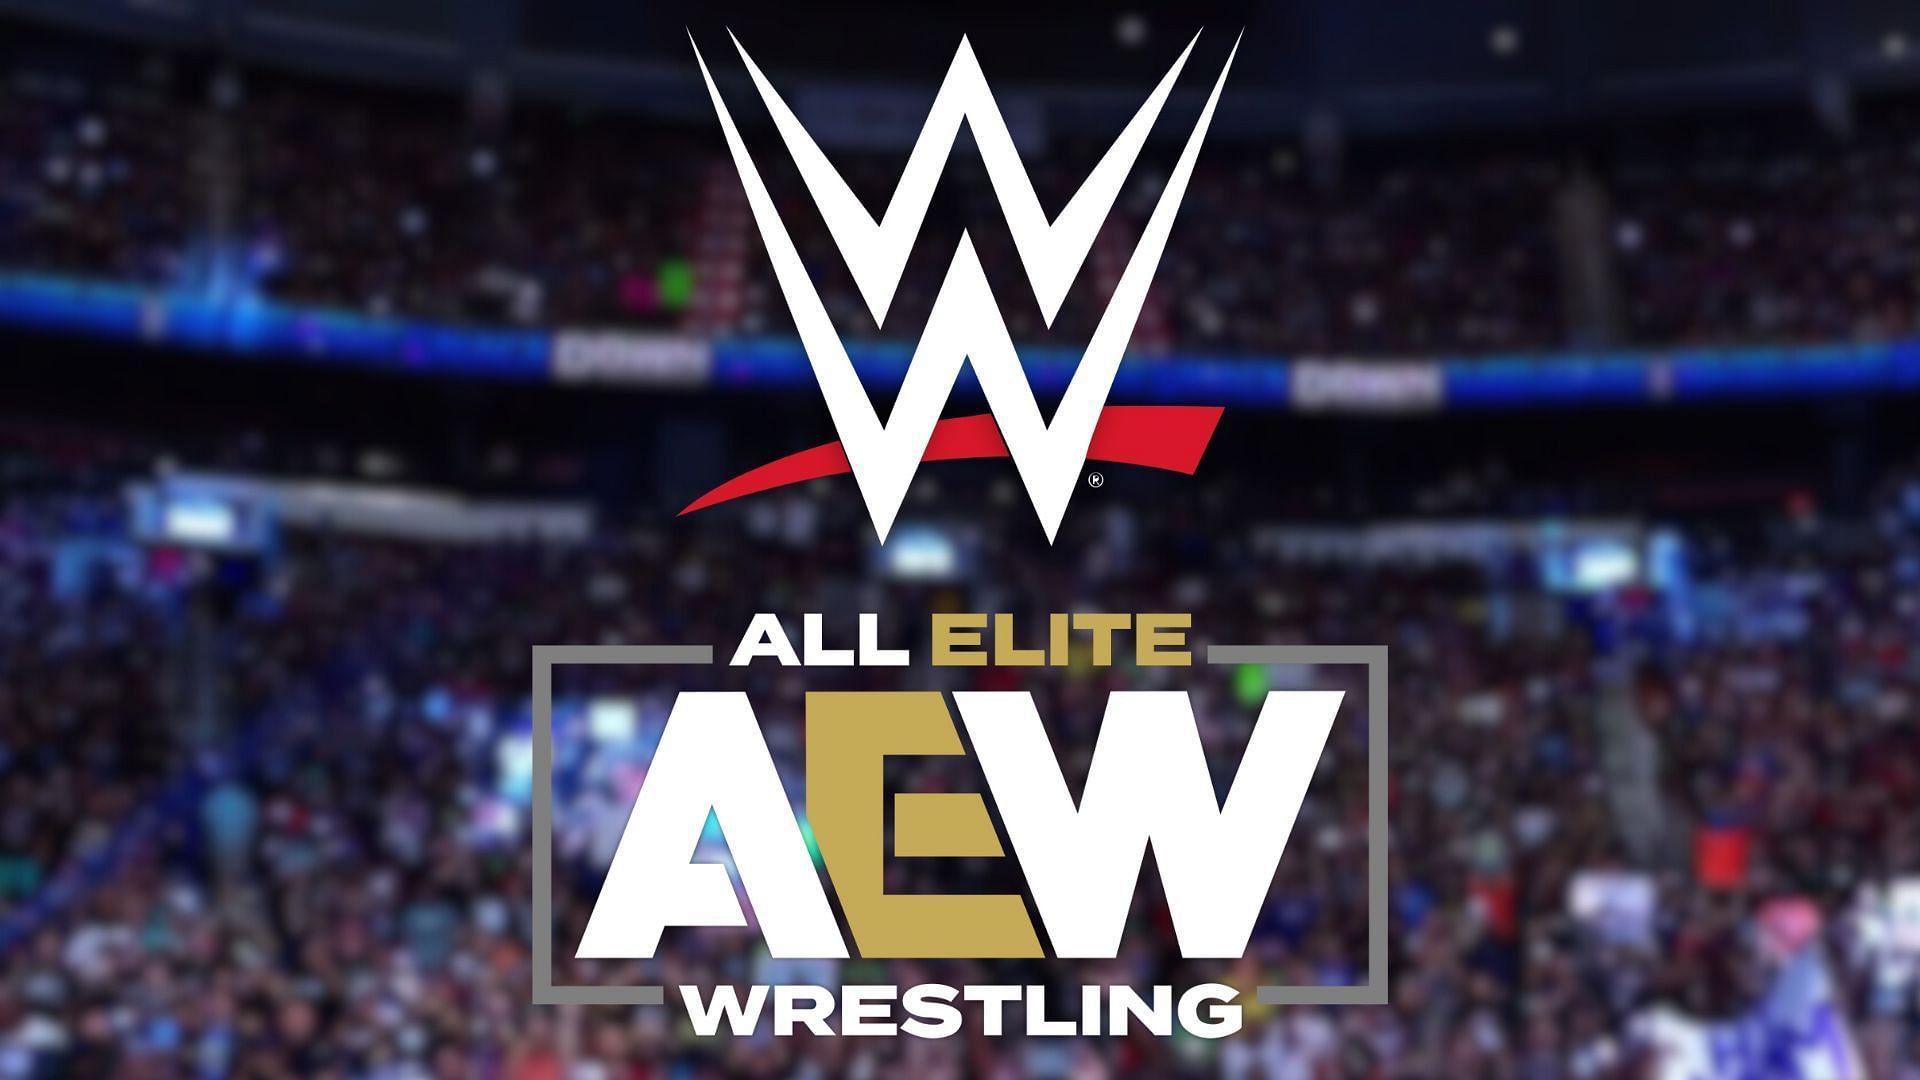 WWE and AEW are the two largest wrestling promotions in the world.